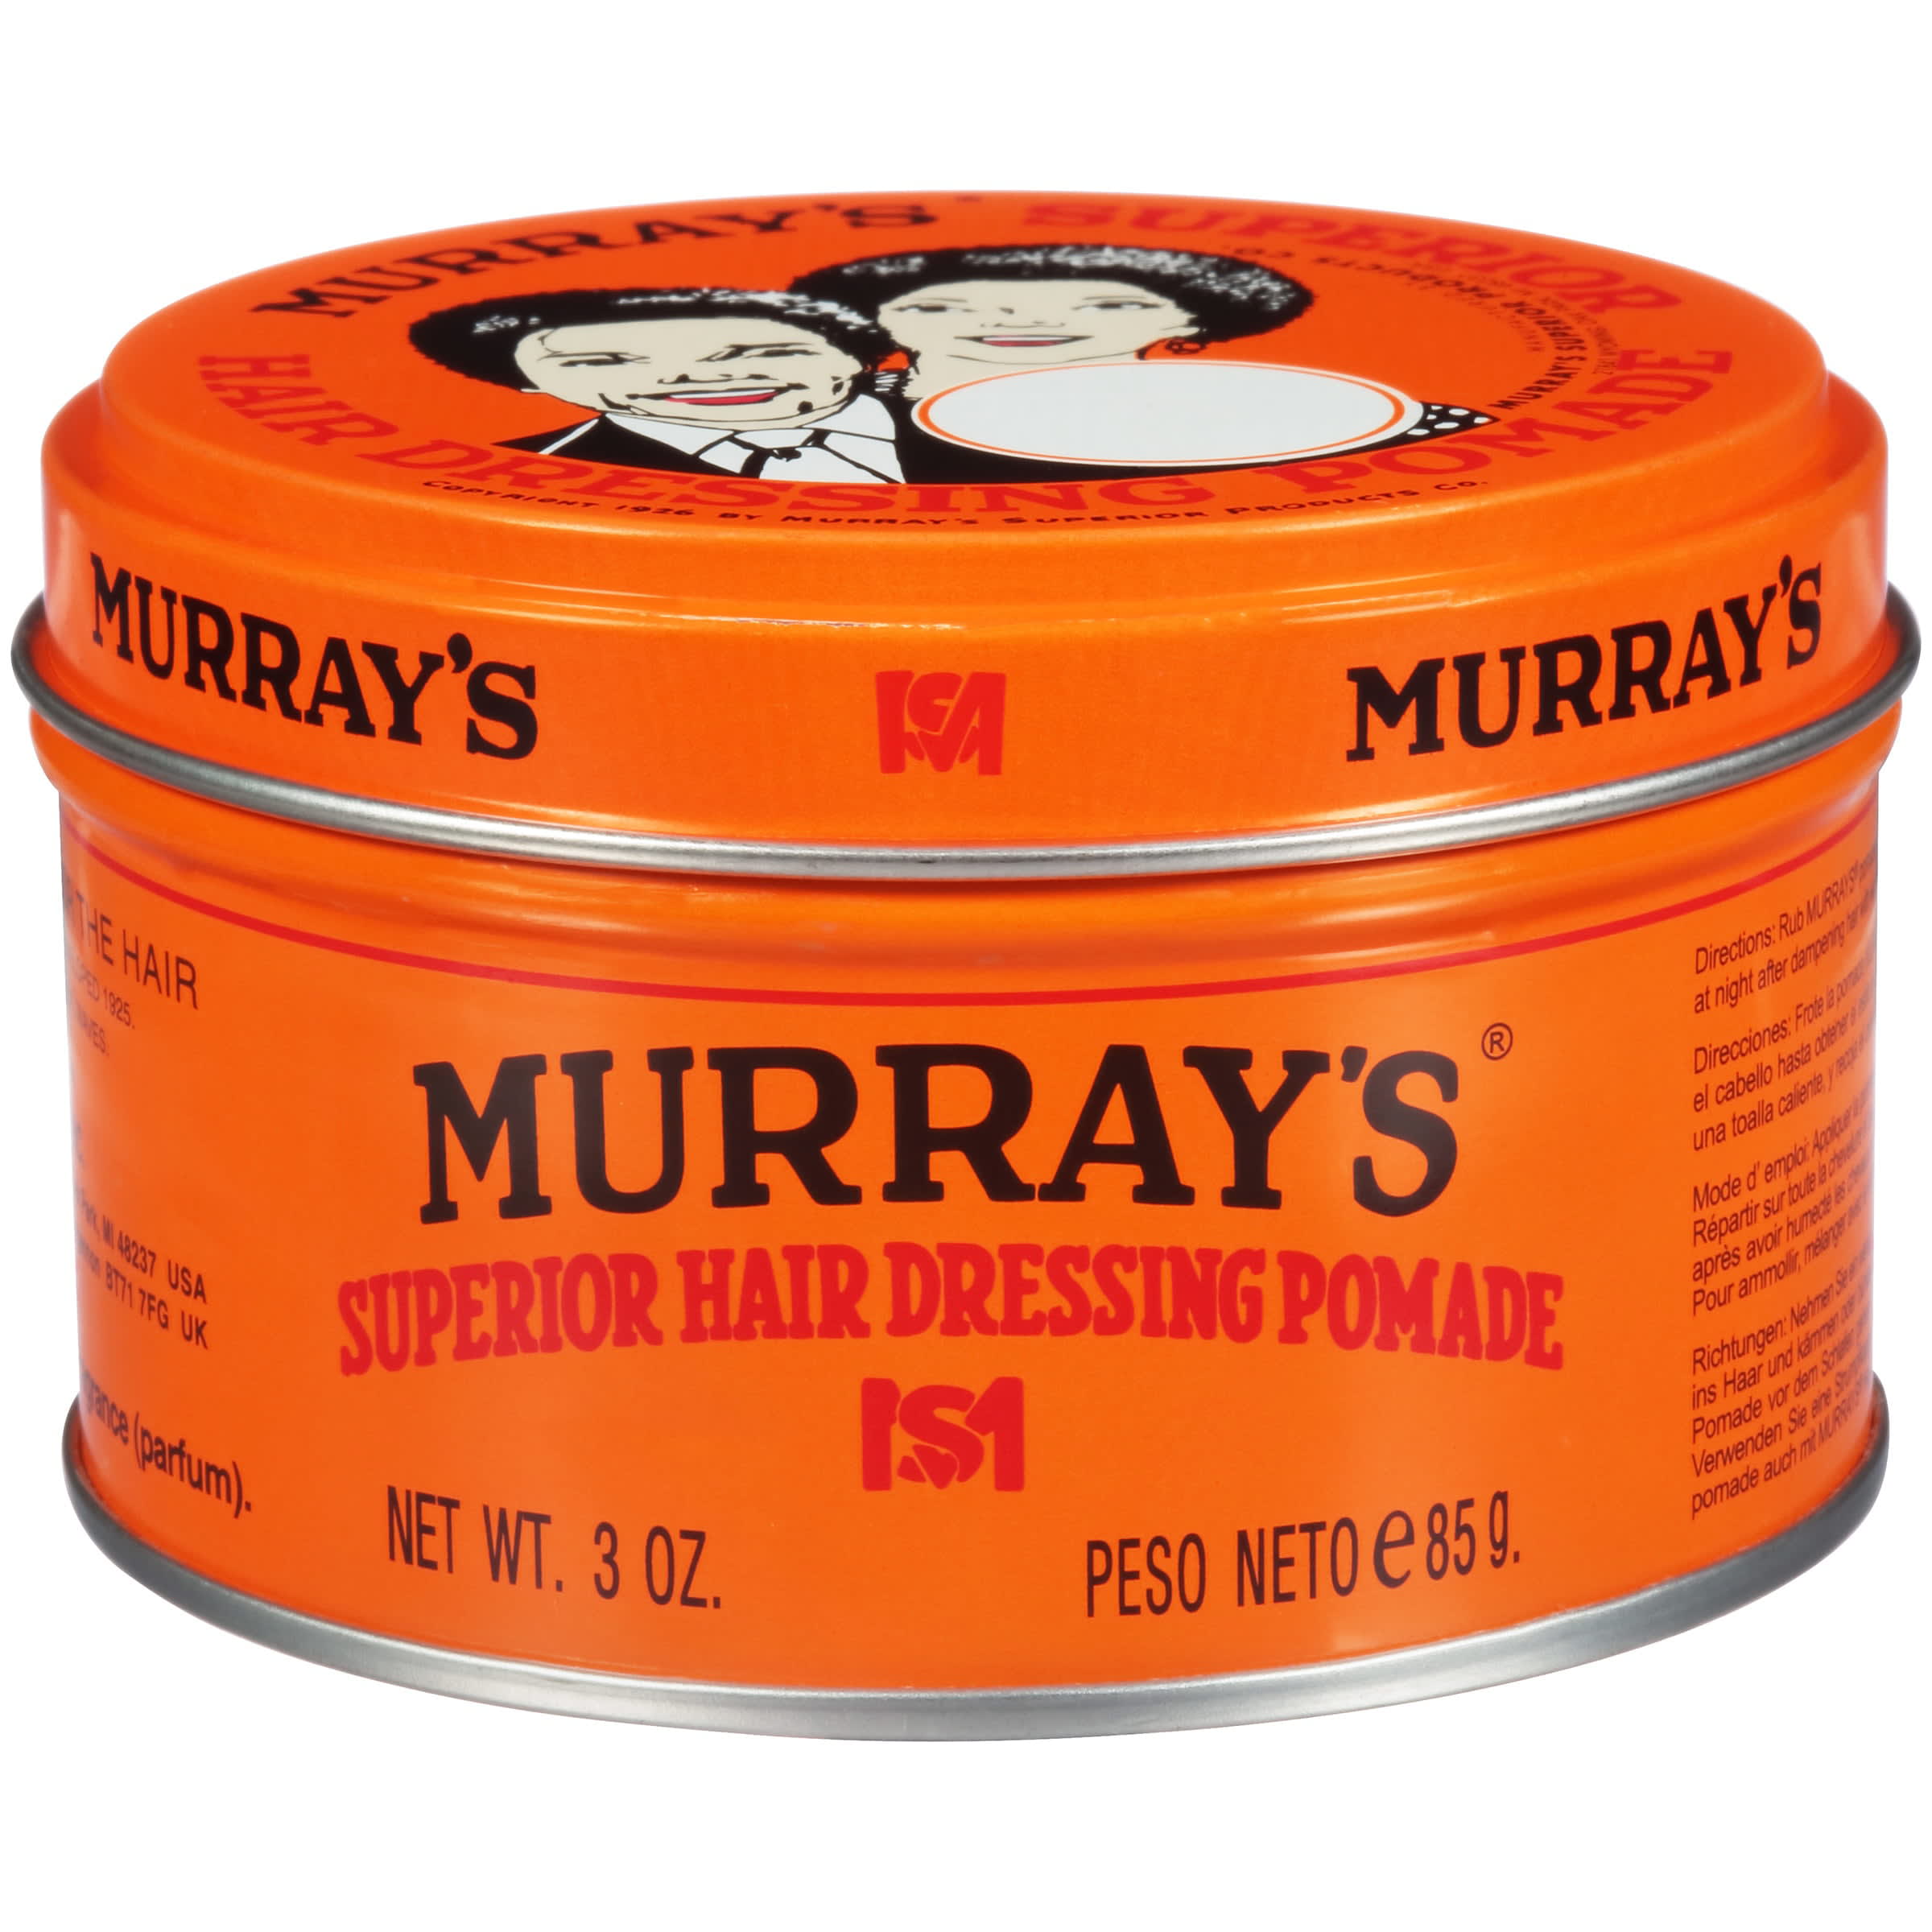 Murray's Superior Hair Dressing Pomade, black men products